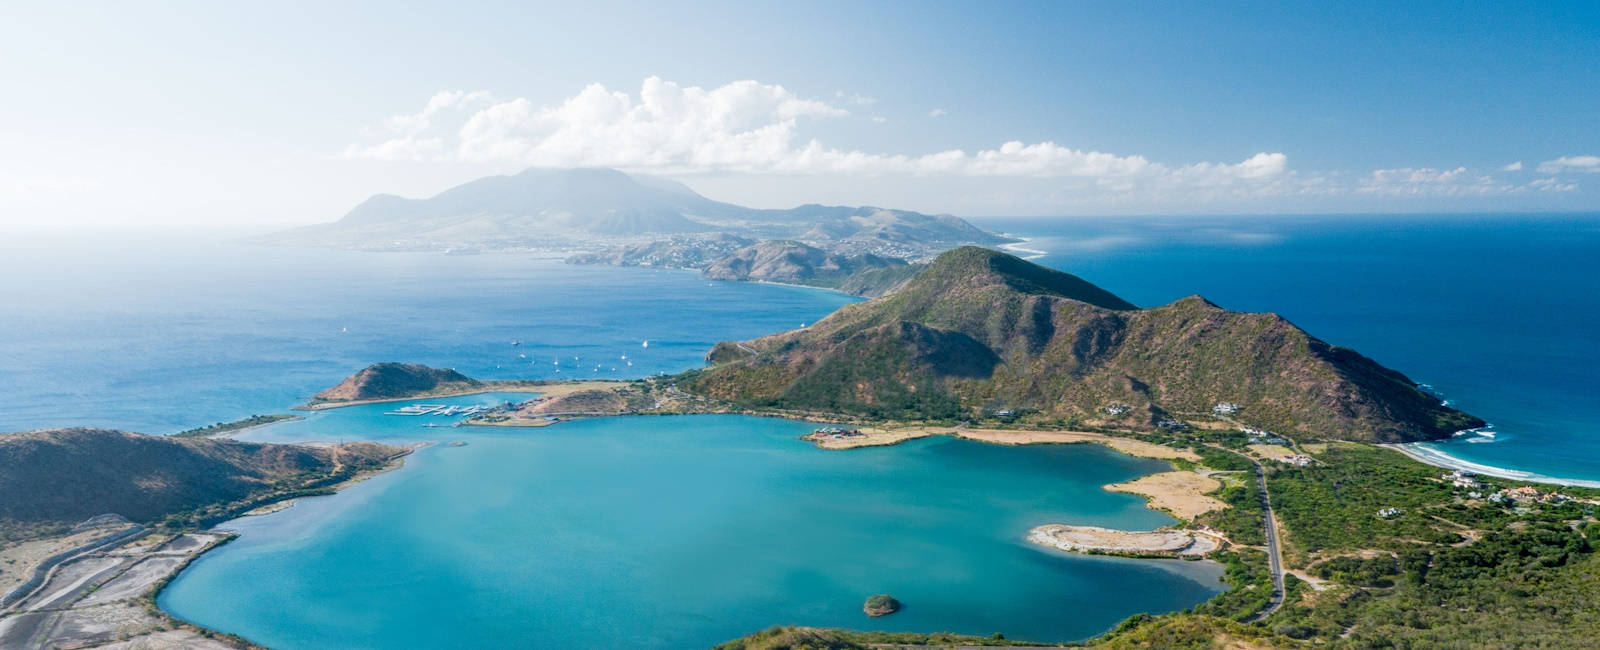 St Kitts And Nevis Bay Wallpaper